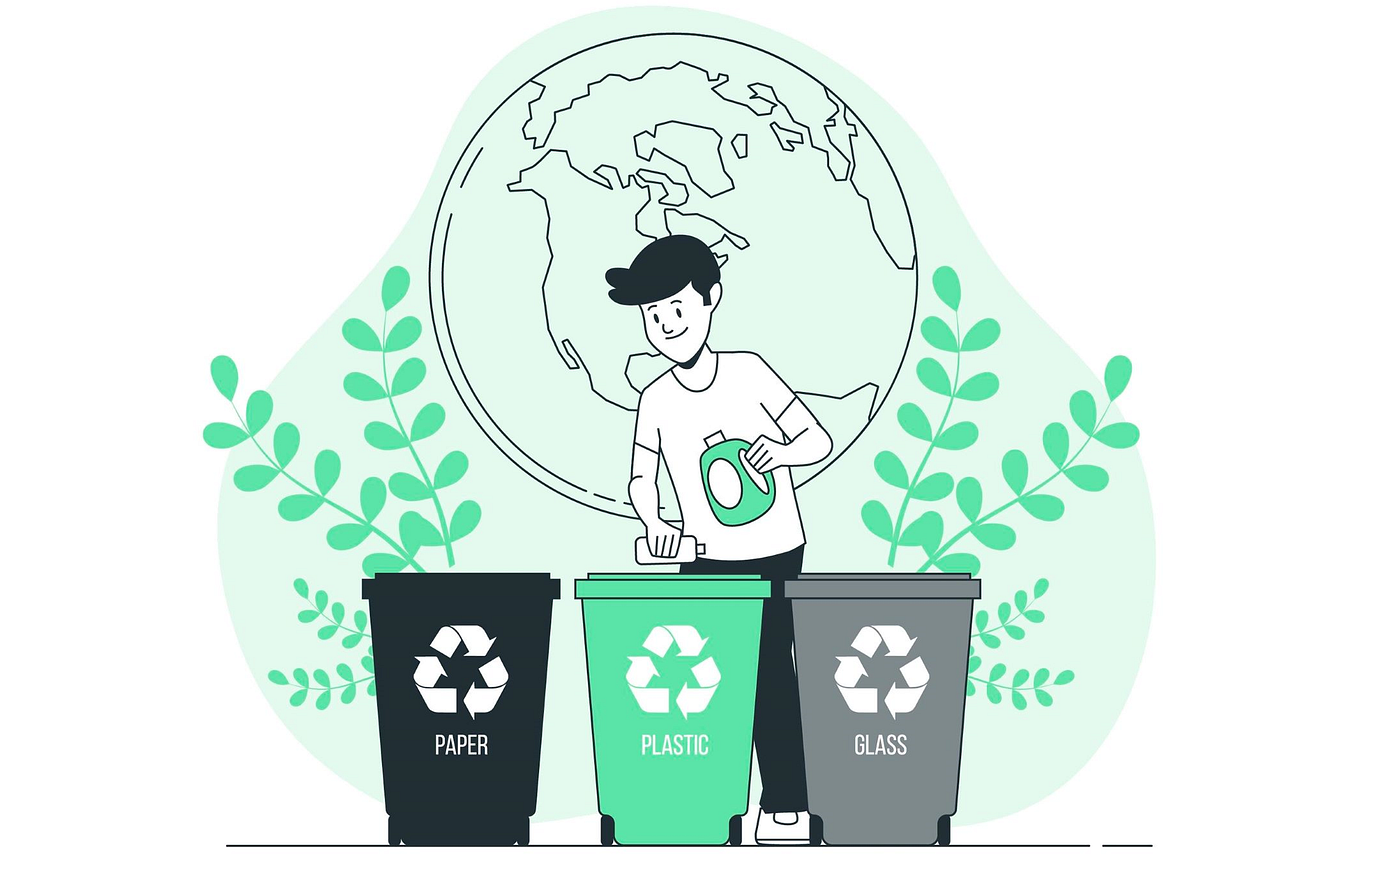 Man recycling plastic bottle with three recycling bins labeled paper, plastic and glass.